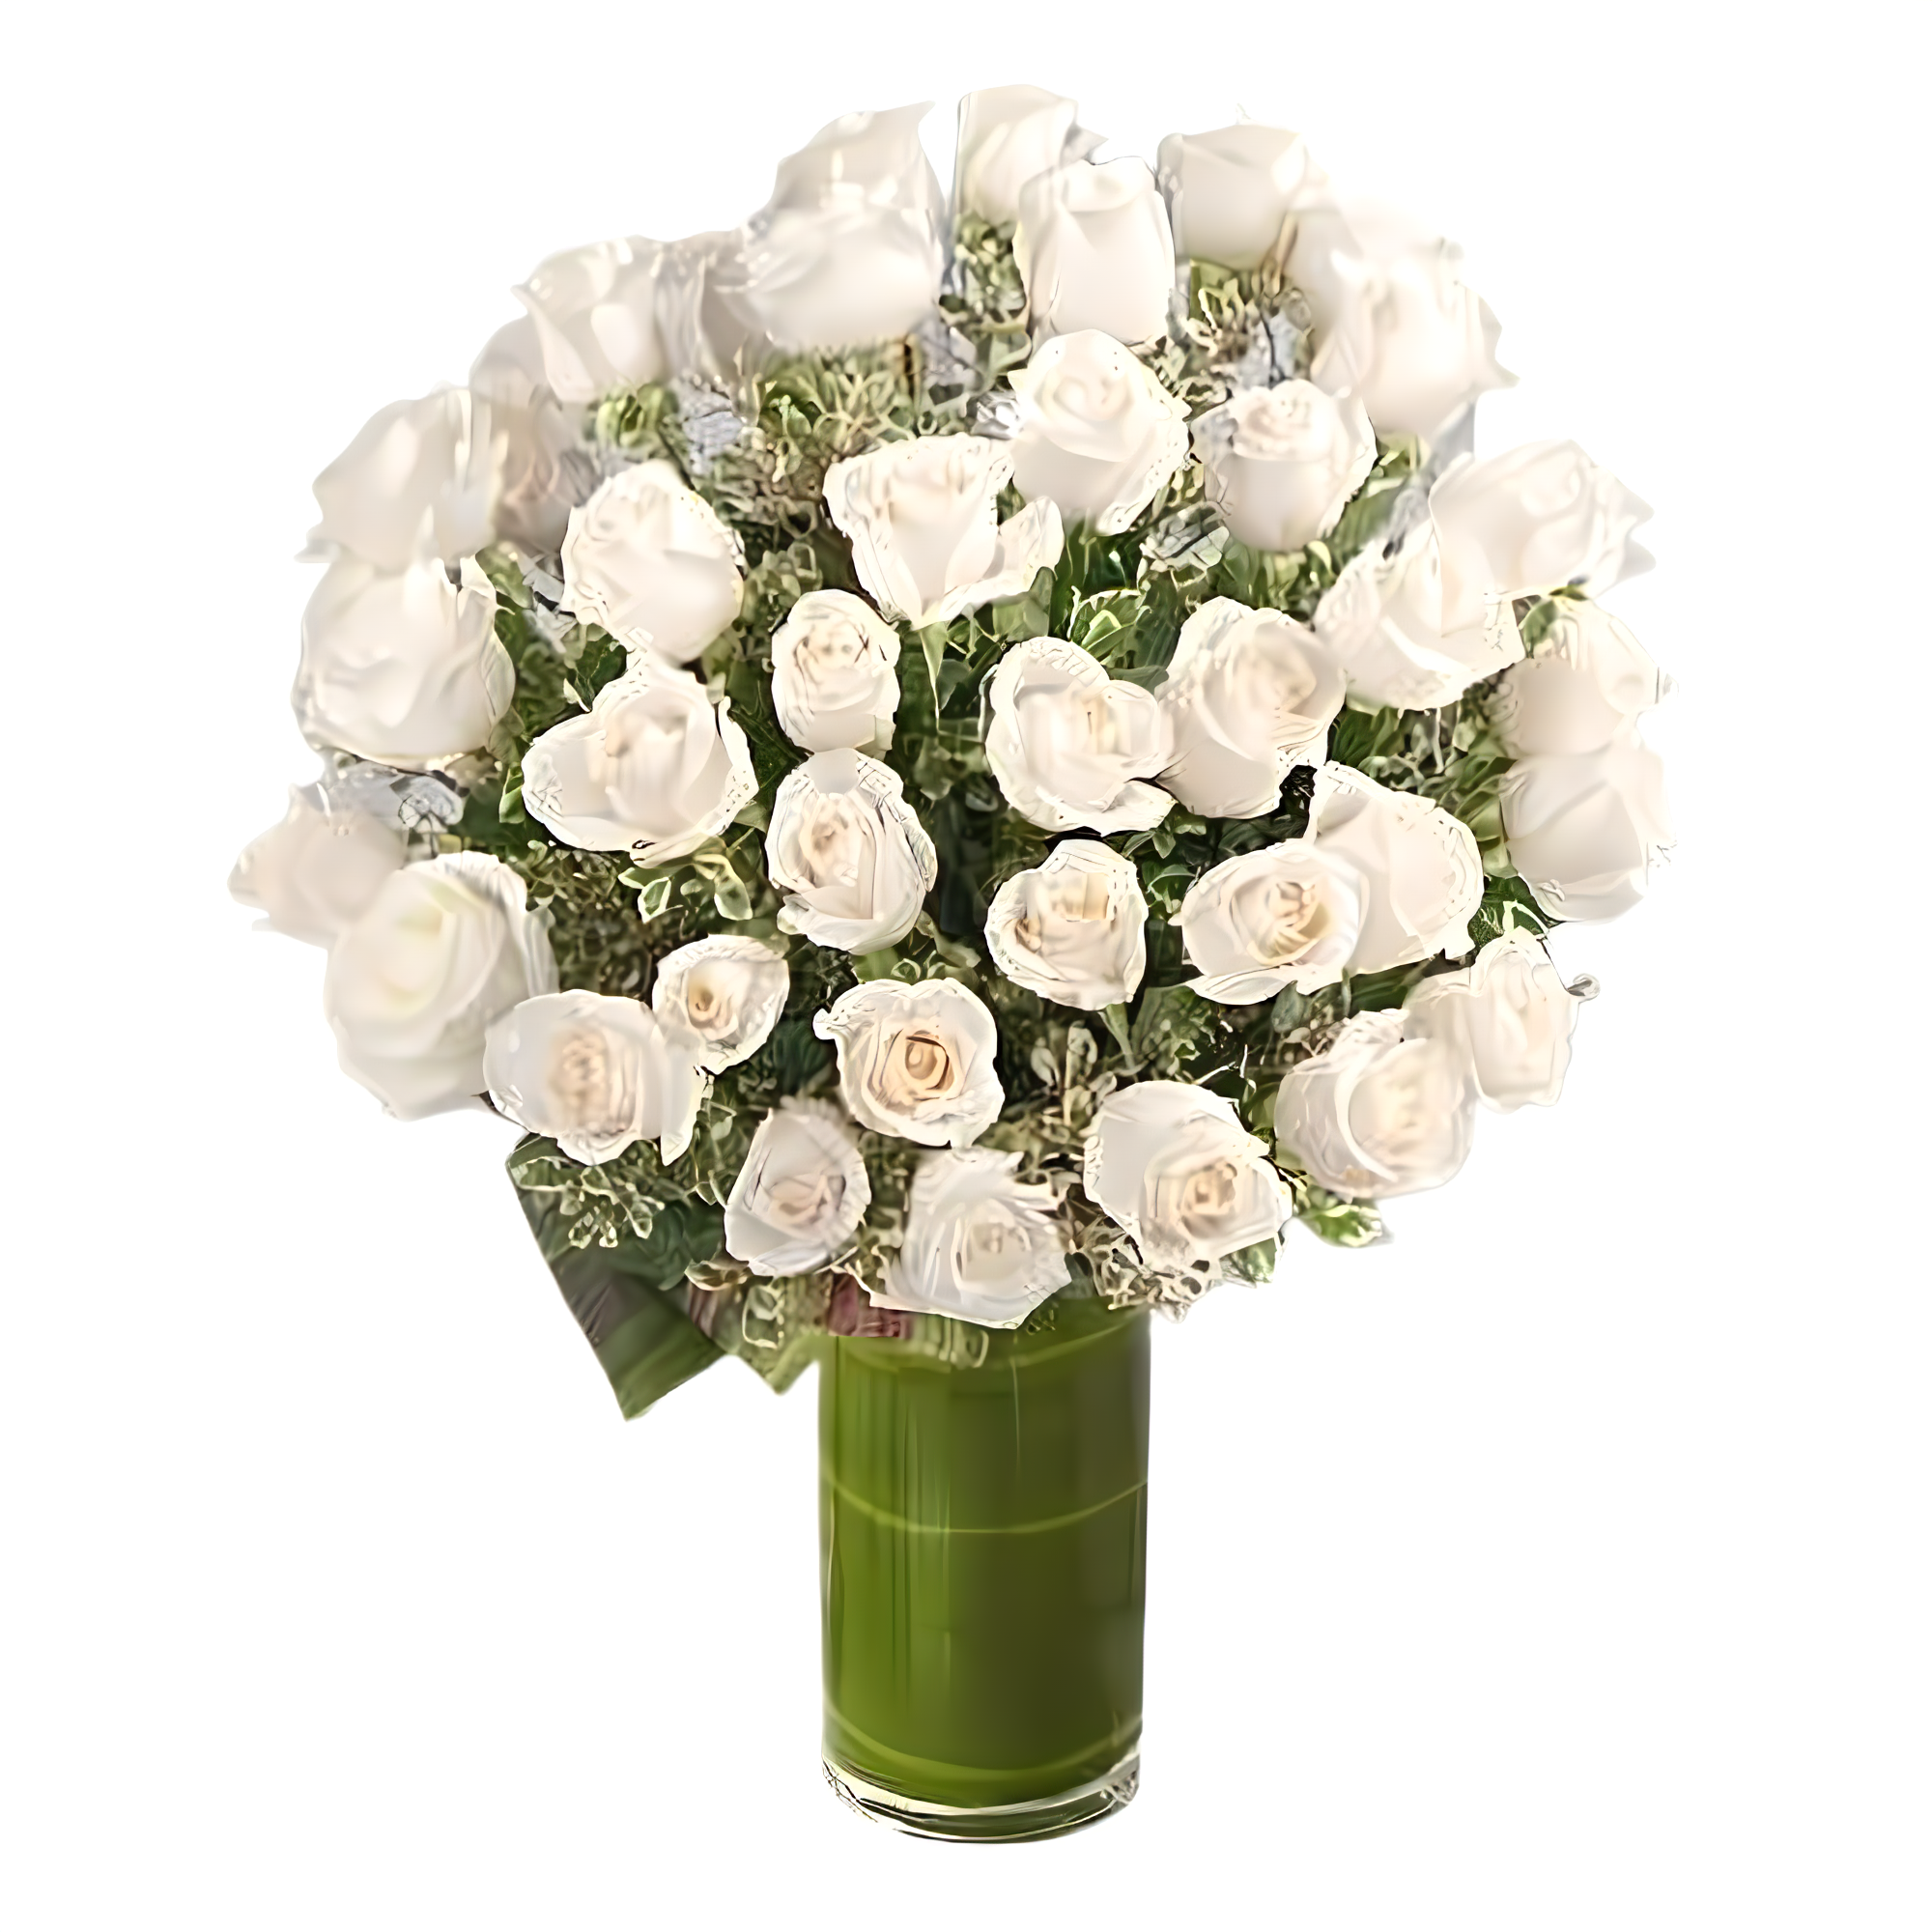 NYC Flower Delivery - Luxury Rose Bouquet - 48 Premium White Long Stem Roses - Products > Luxury Collection